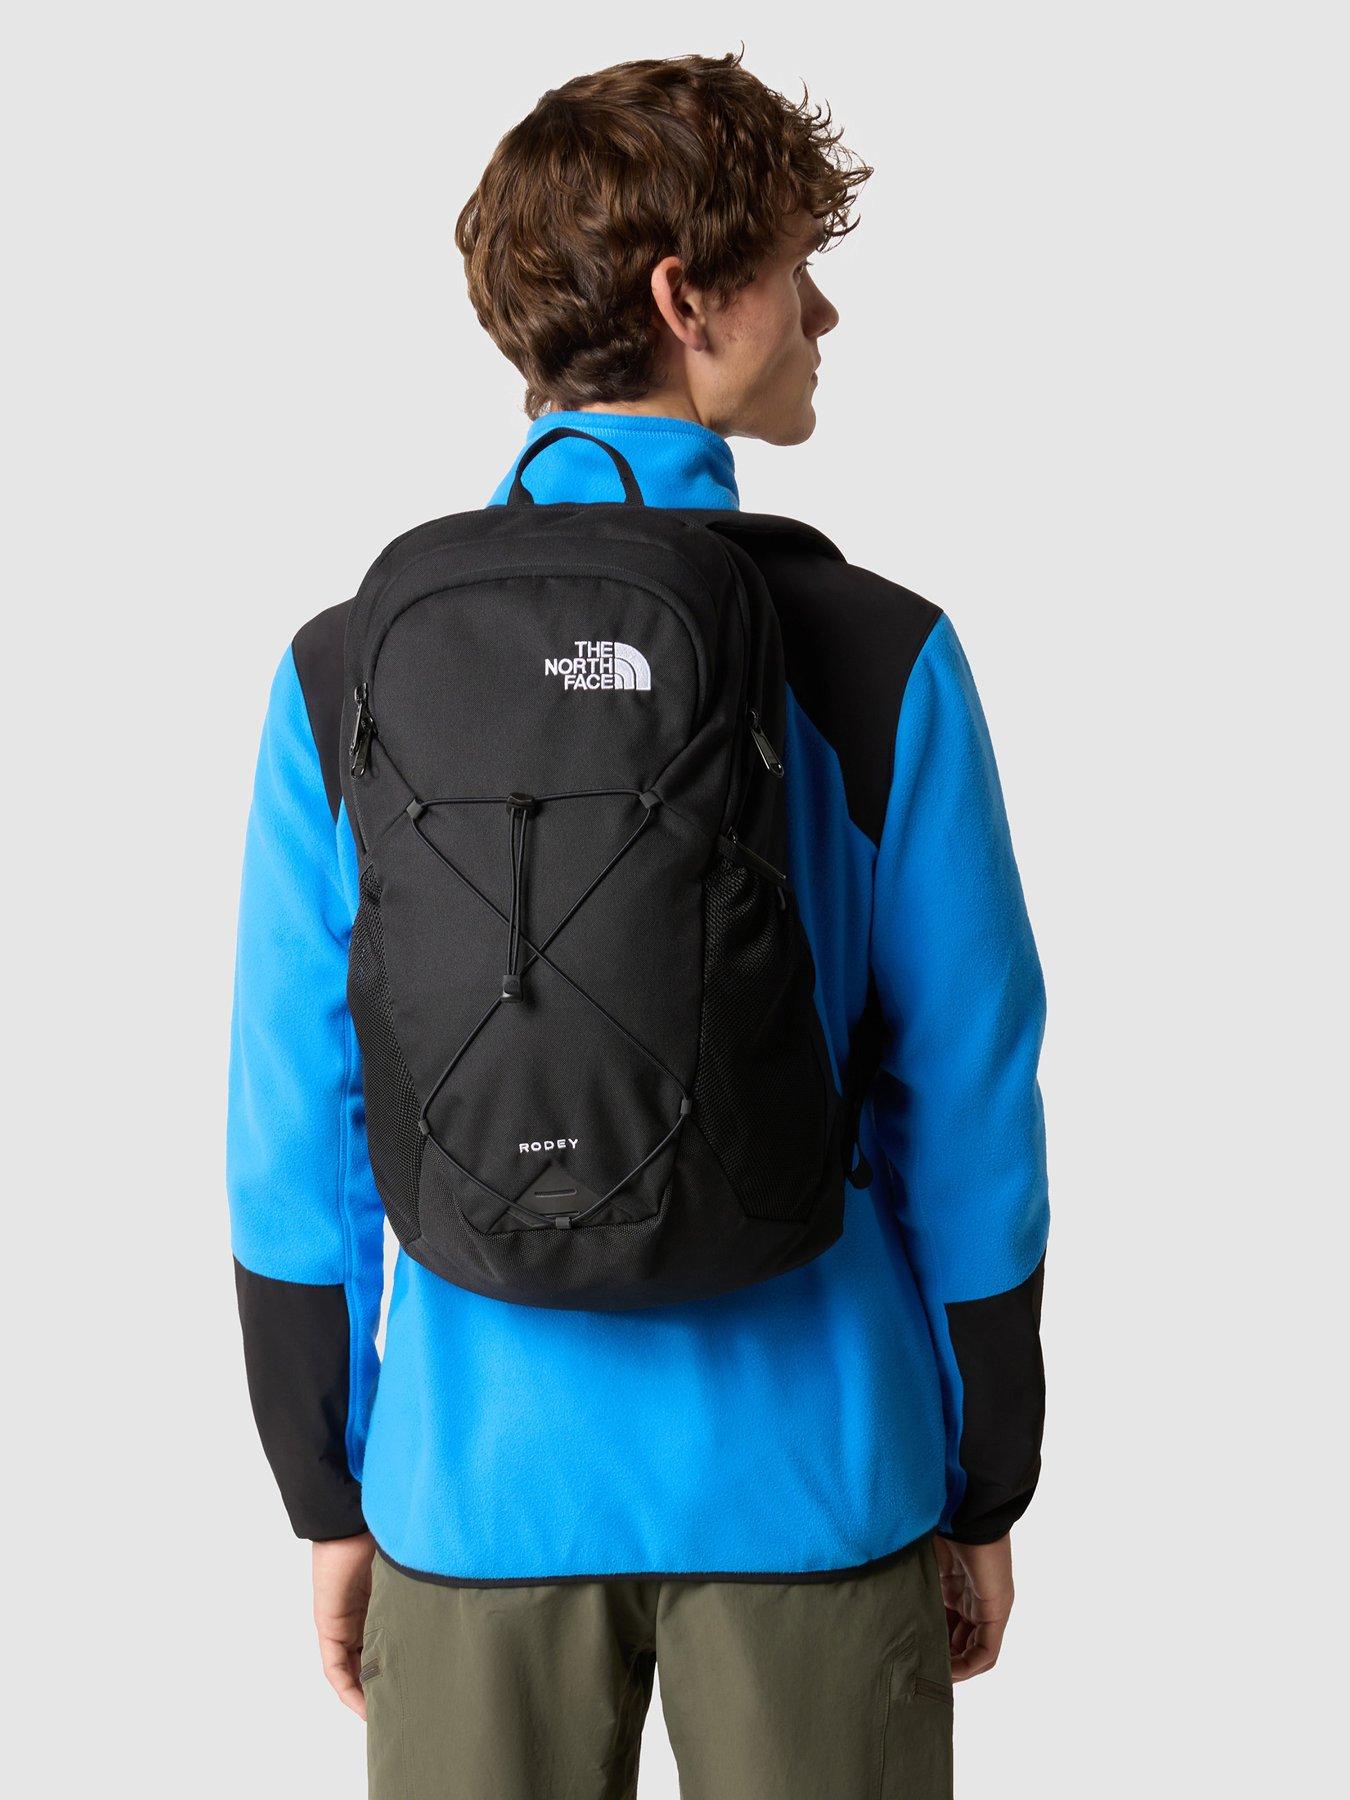 THE NORTH FACE Men's Rodey Backpack - Black | Very.co.uk